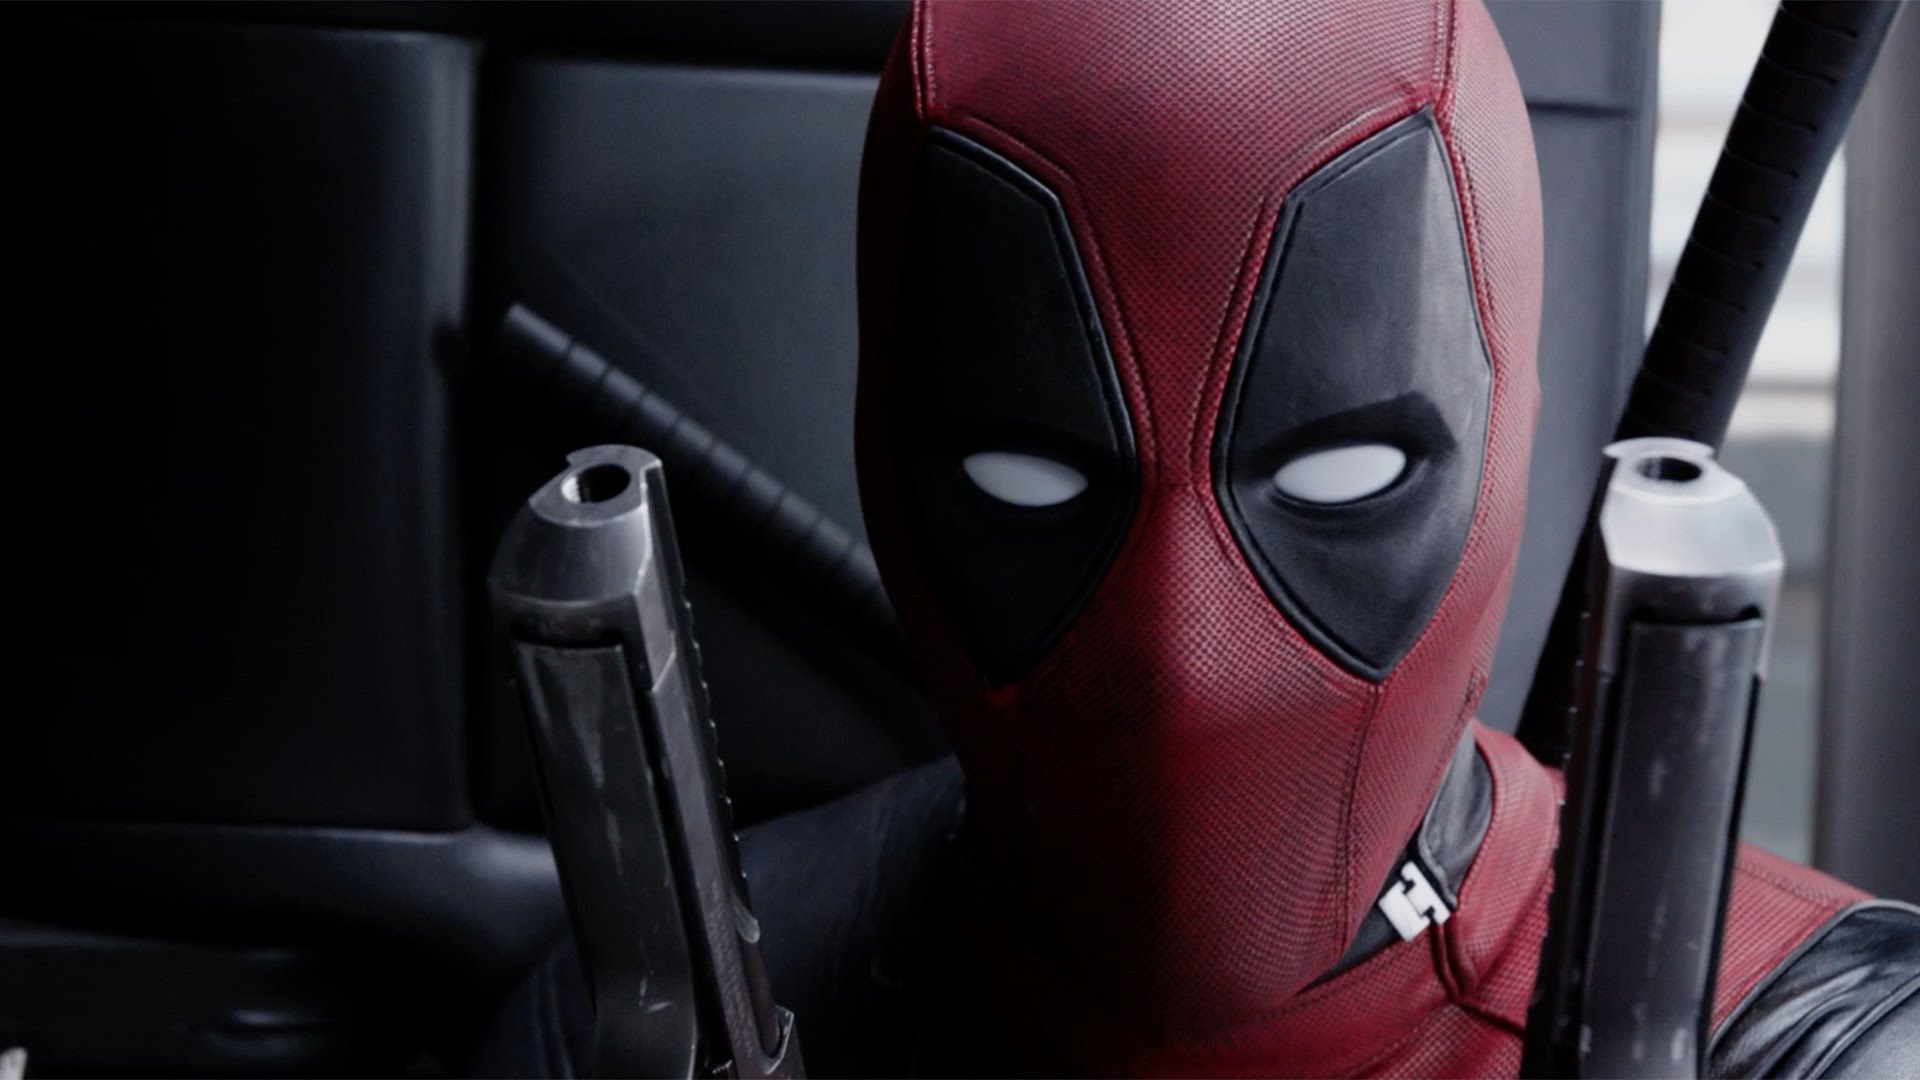 Deadpool: Red Band trailer #2